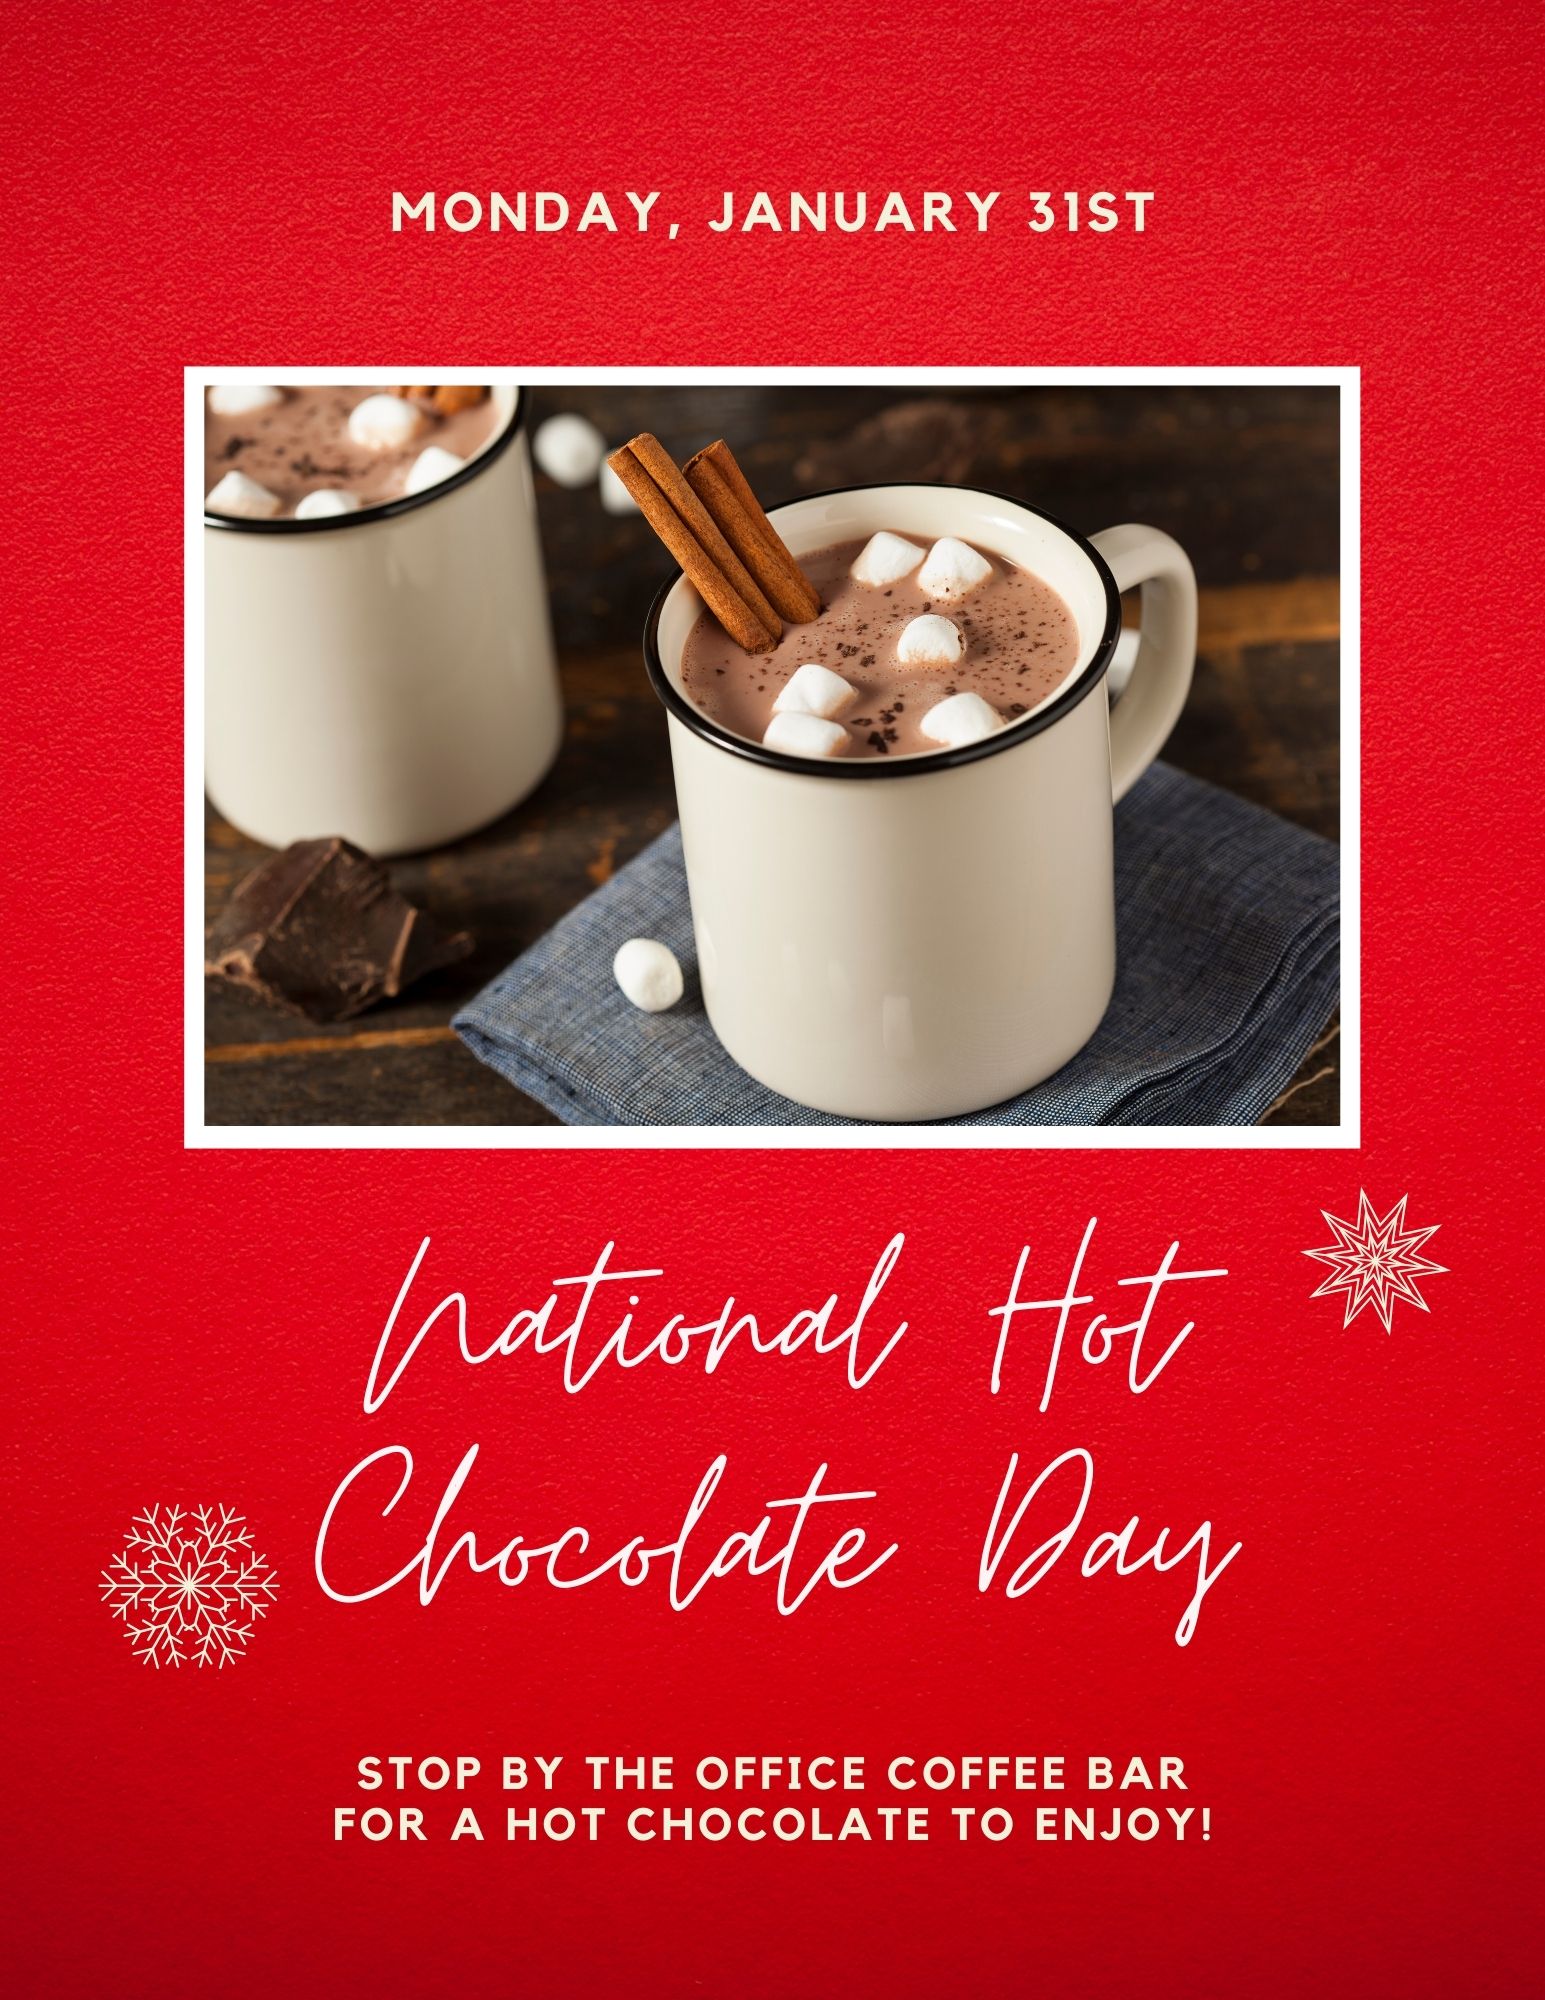 Two mugs of hot chocolate with marshmallows and cinnamon sticks, perfect for cozy evenings in your Apartments for rent woodlands tx.